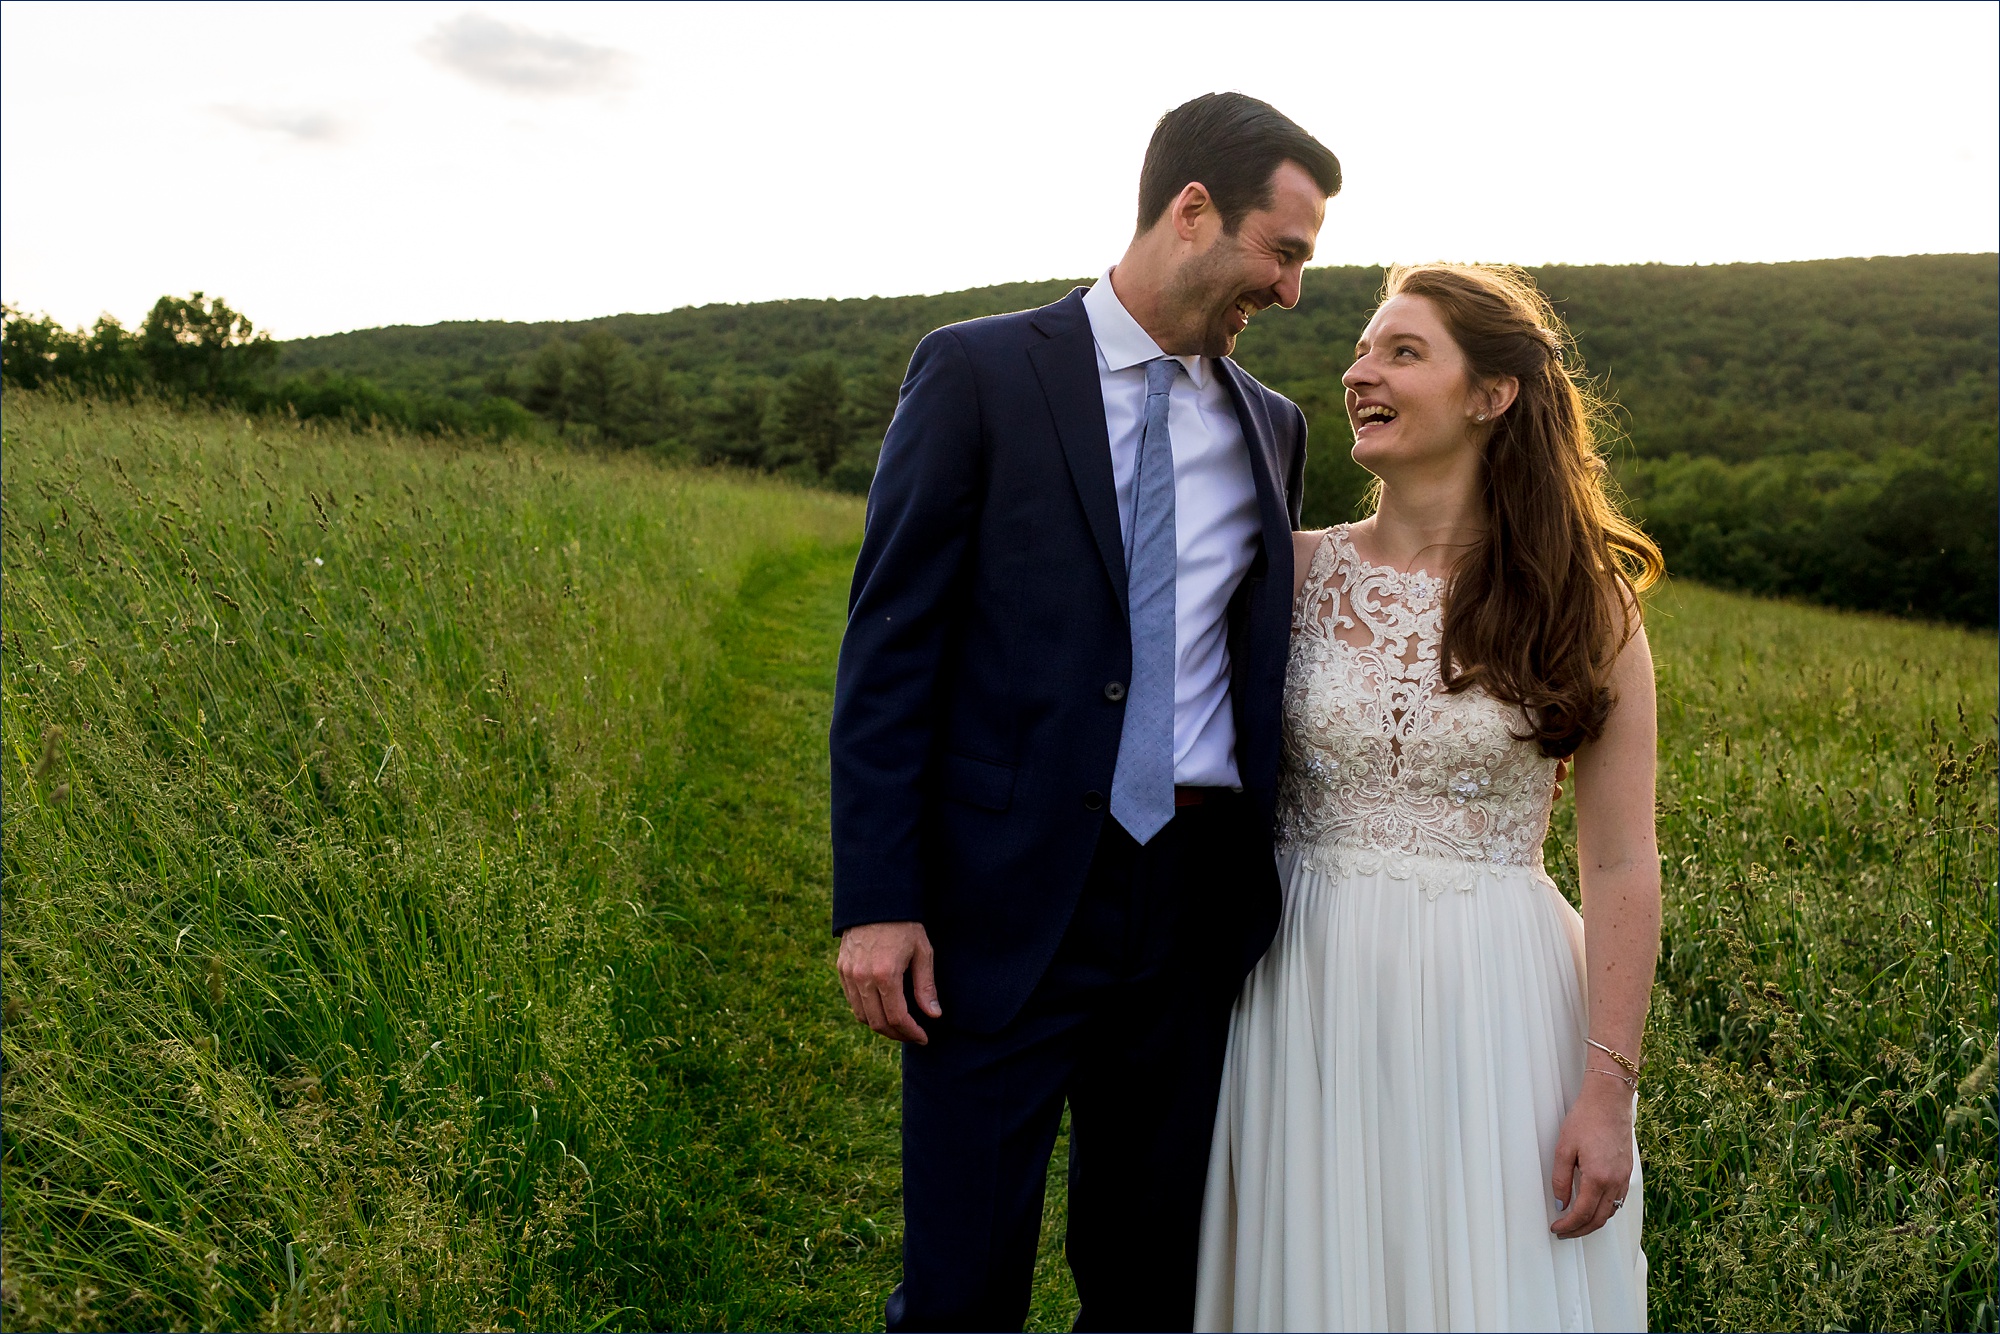 The bride and groom sneak outside in the last light of the day for some photos in the beautiful nature at Kitz Farm in NH